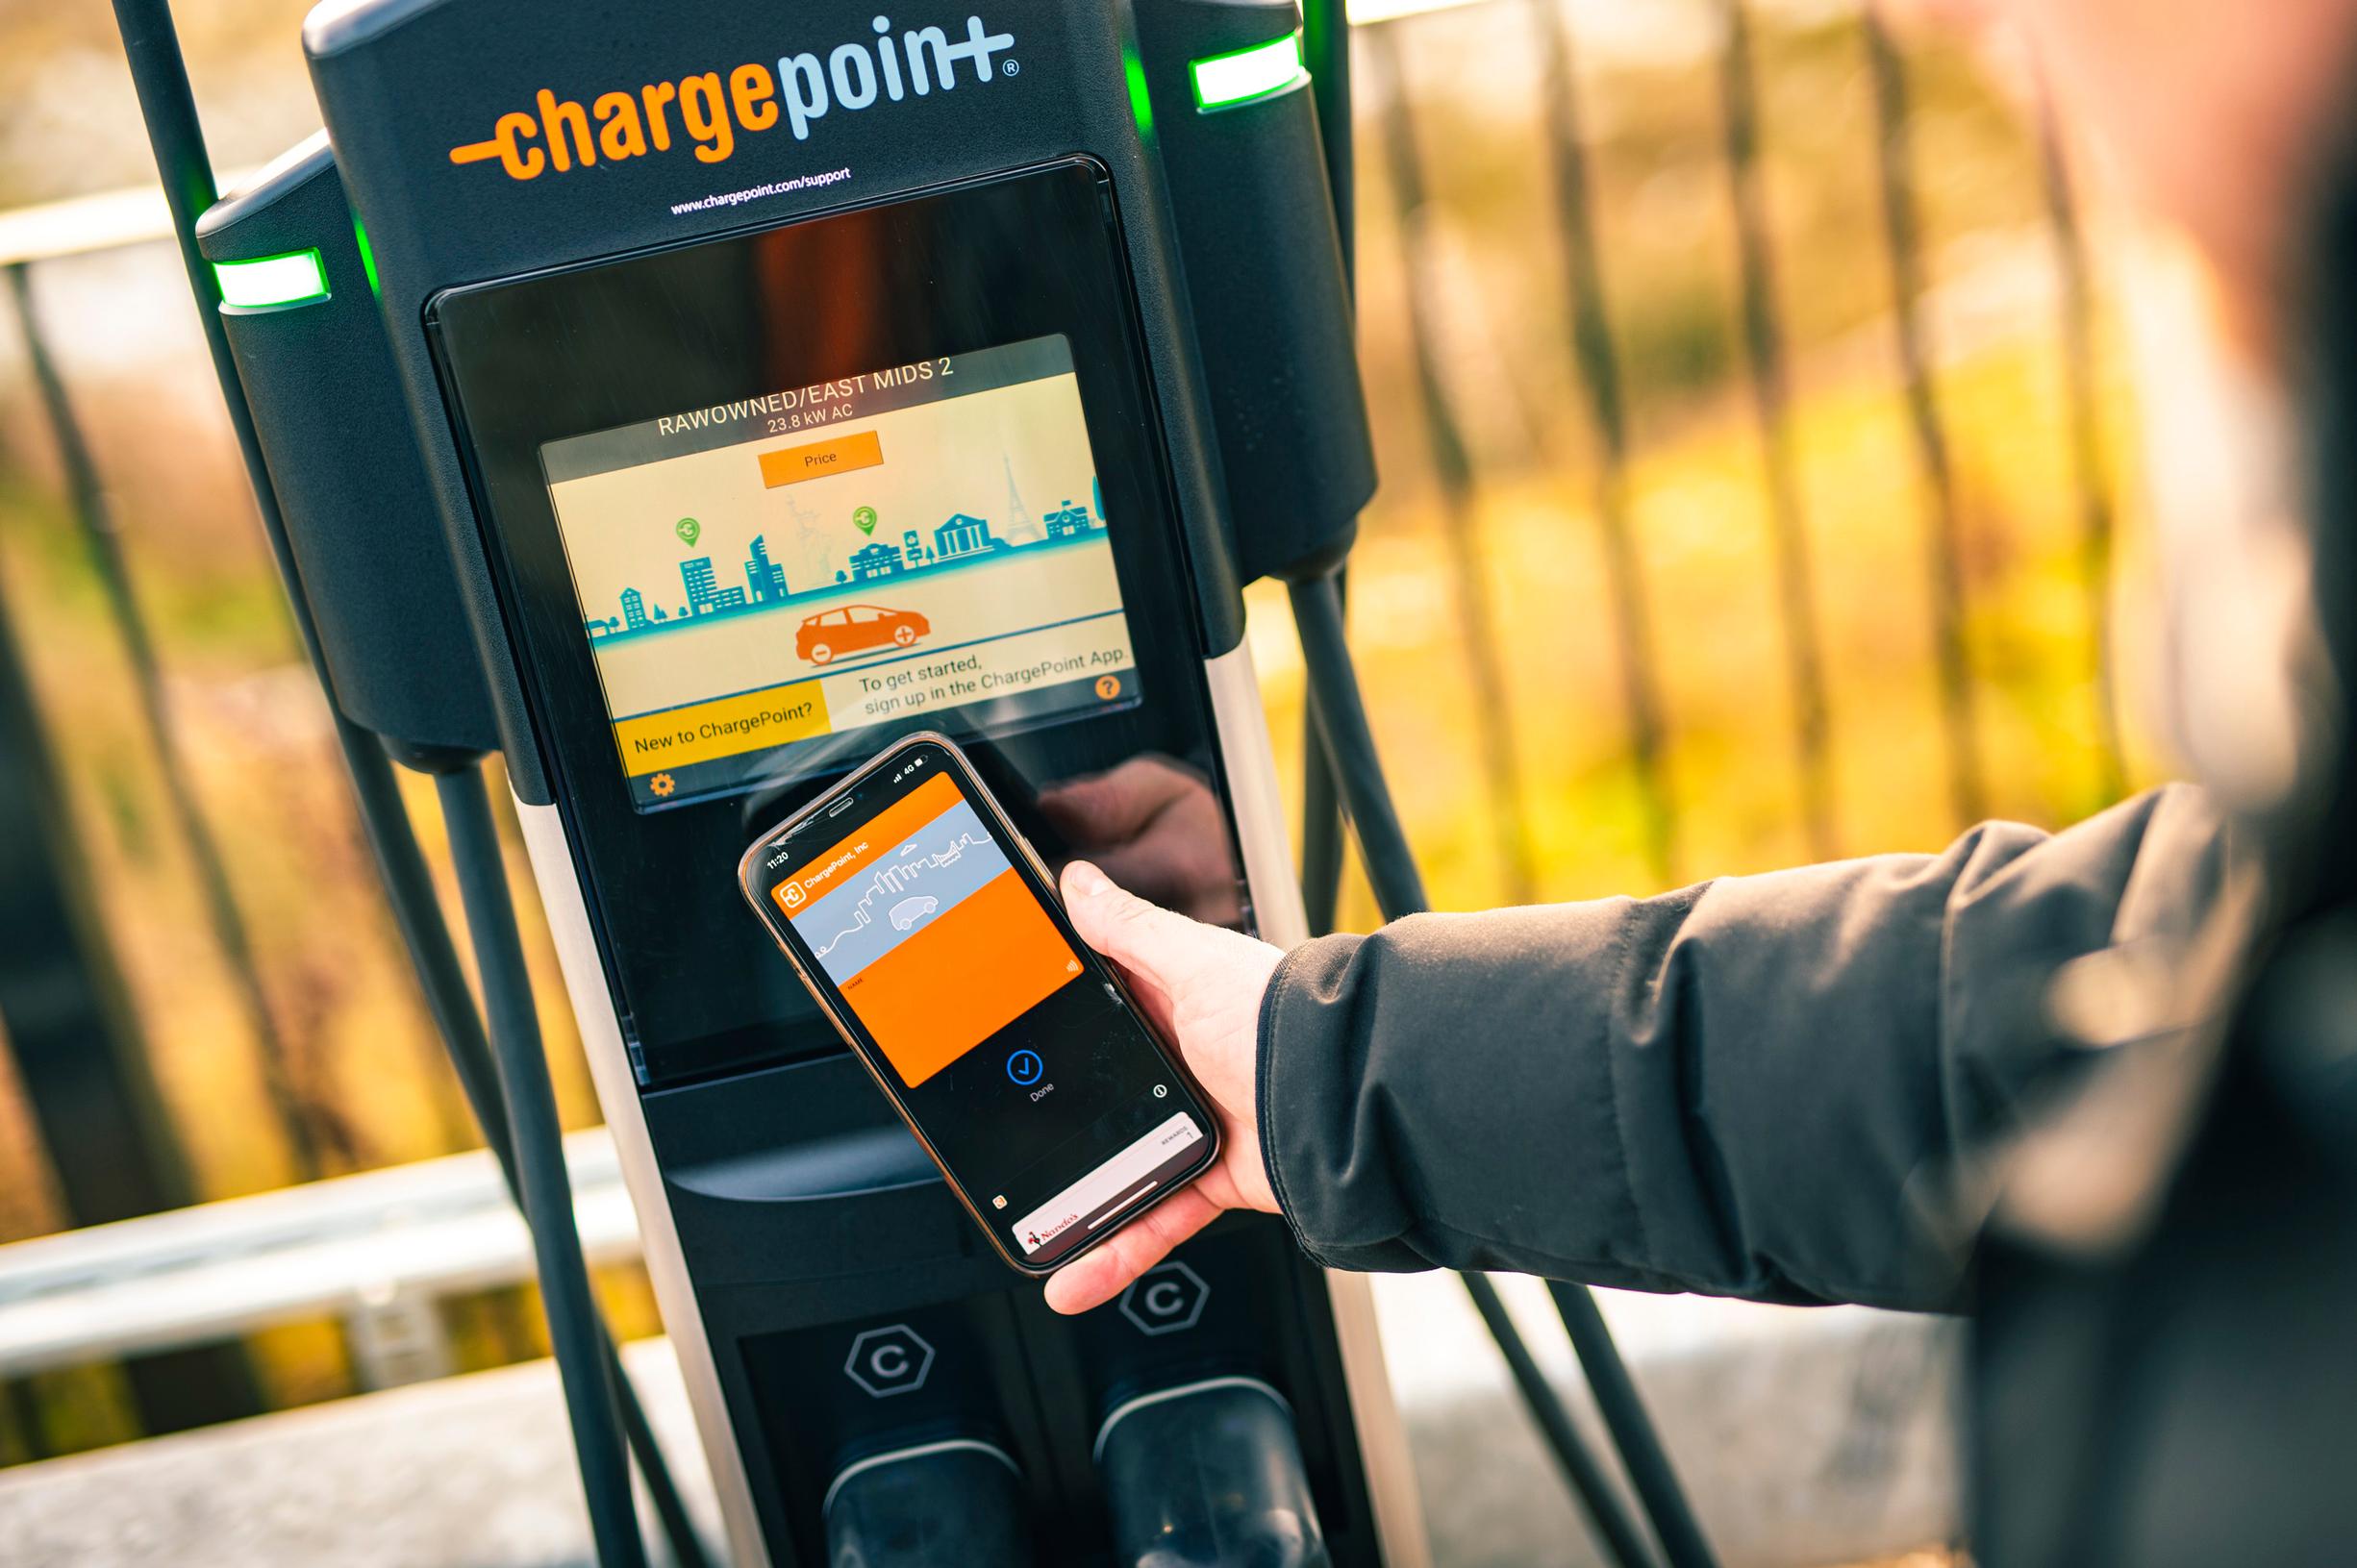 Drivers are given the option to pay to charge through a mobile app, via a contactless credit or debit card or by an RFID card